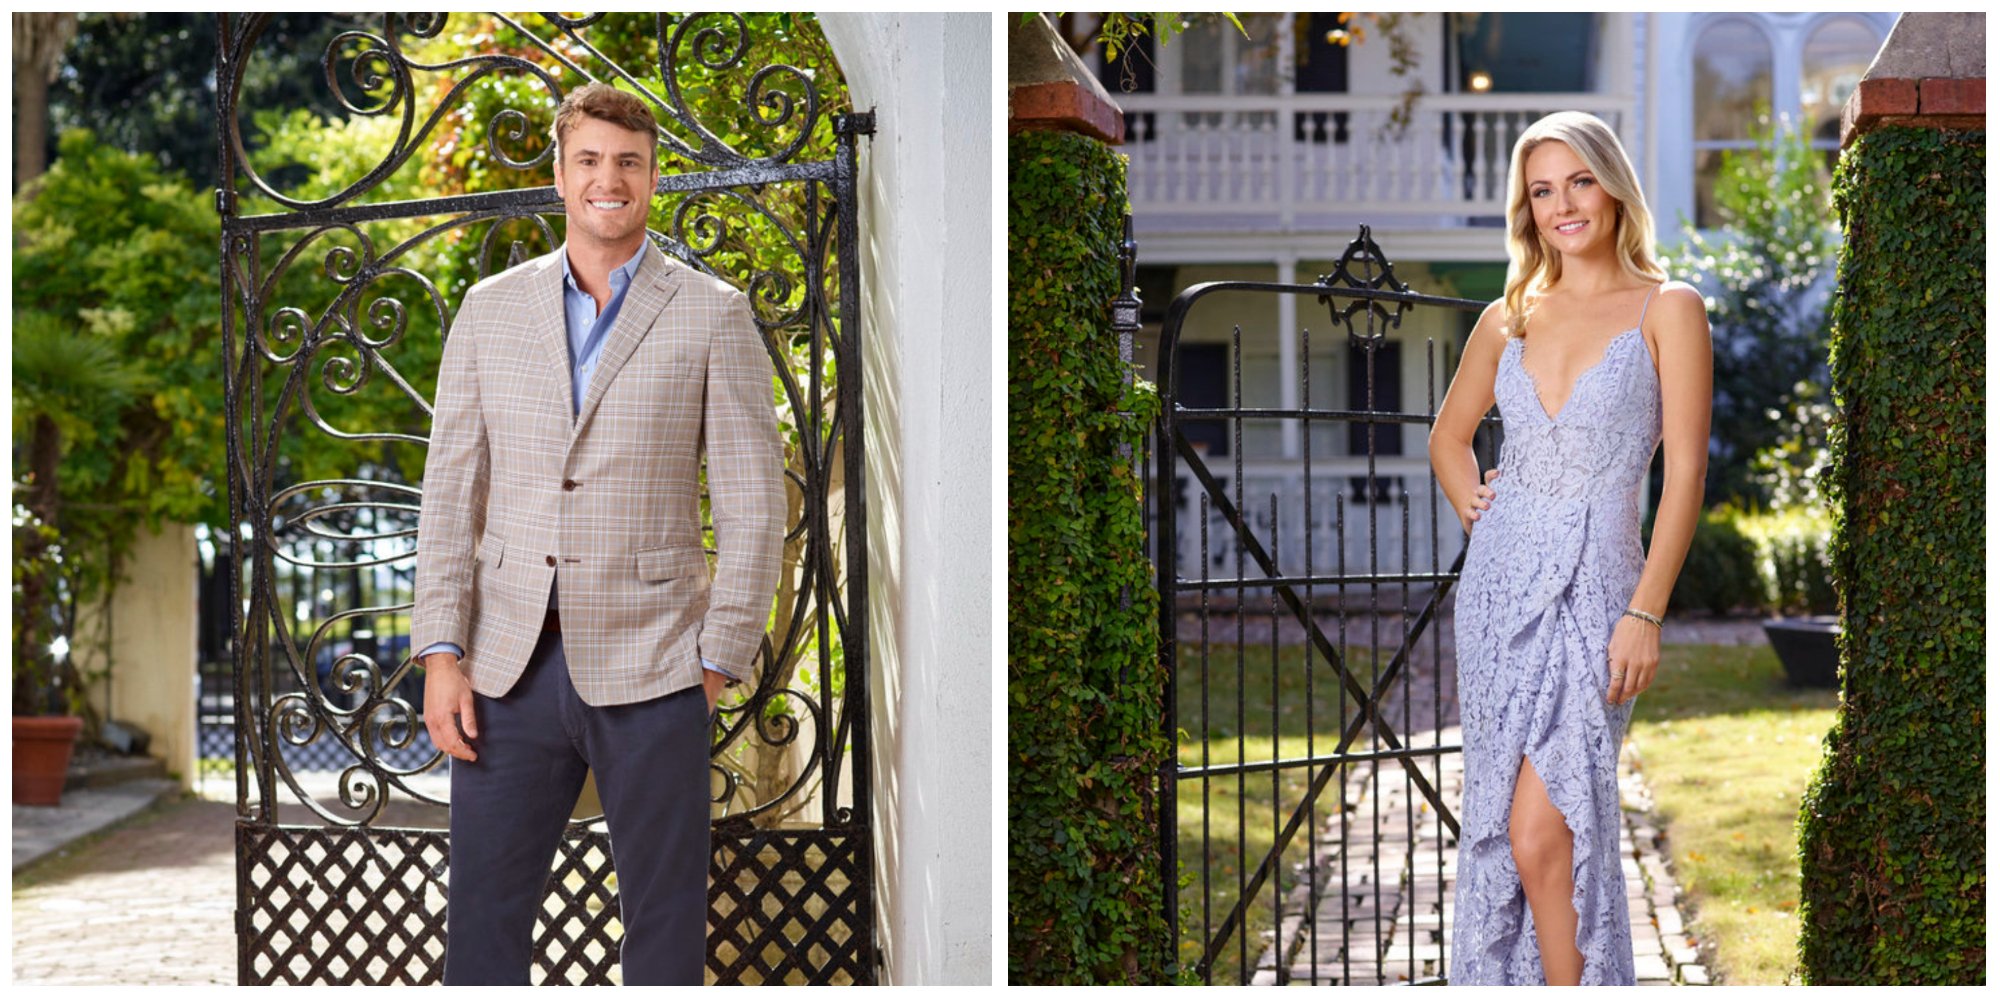 Shep Rose and Taylor Ann Green 'Southern Charm' cast photo